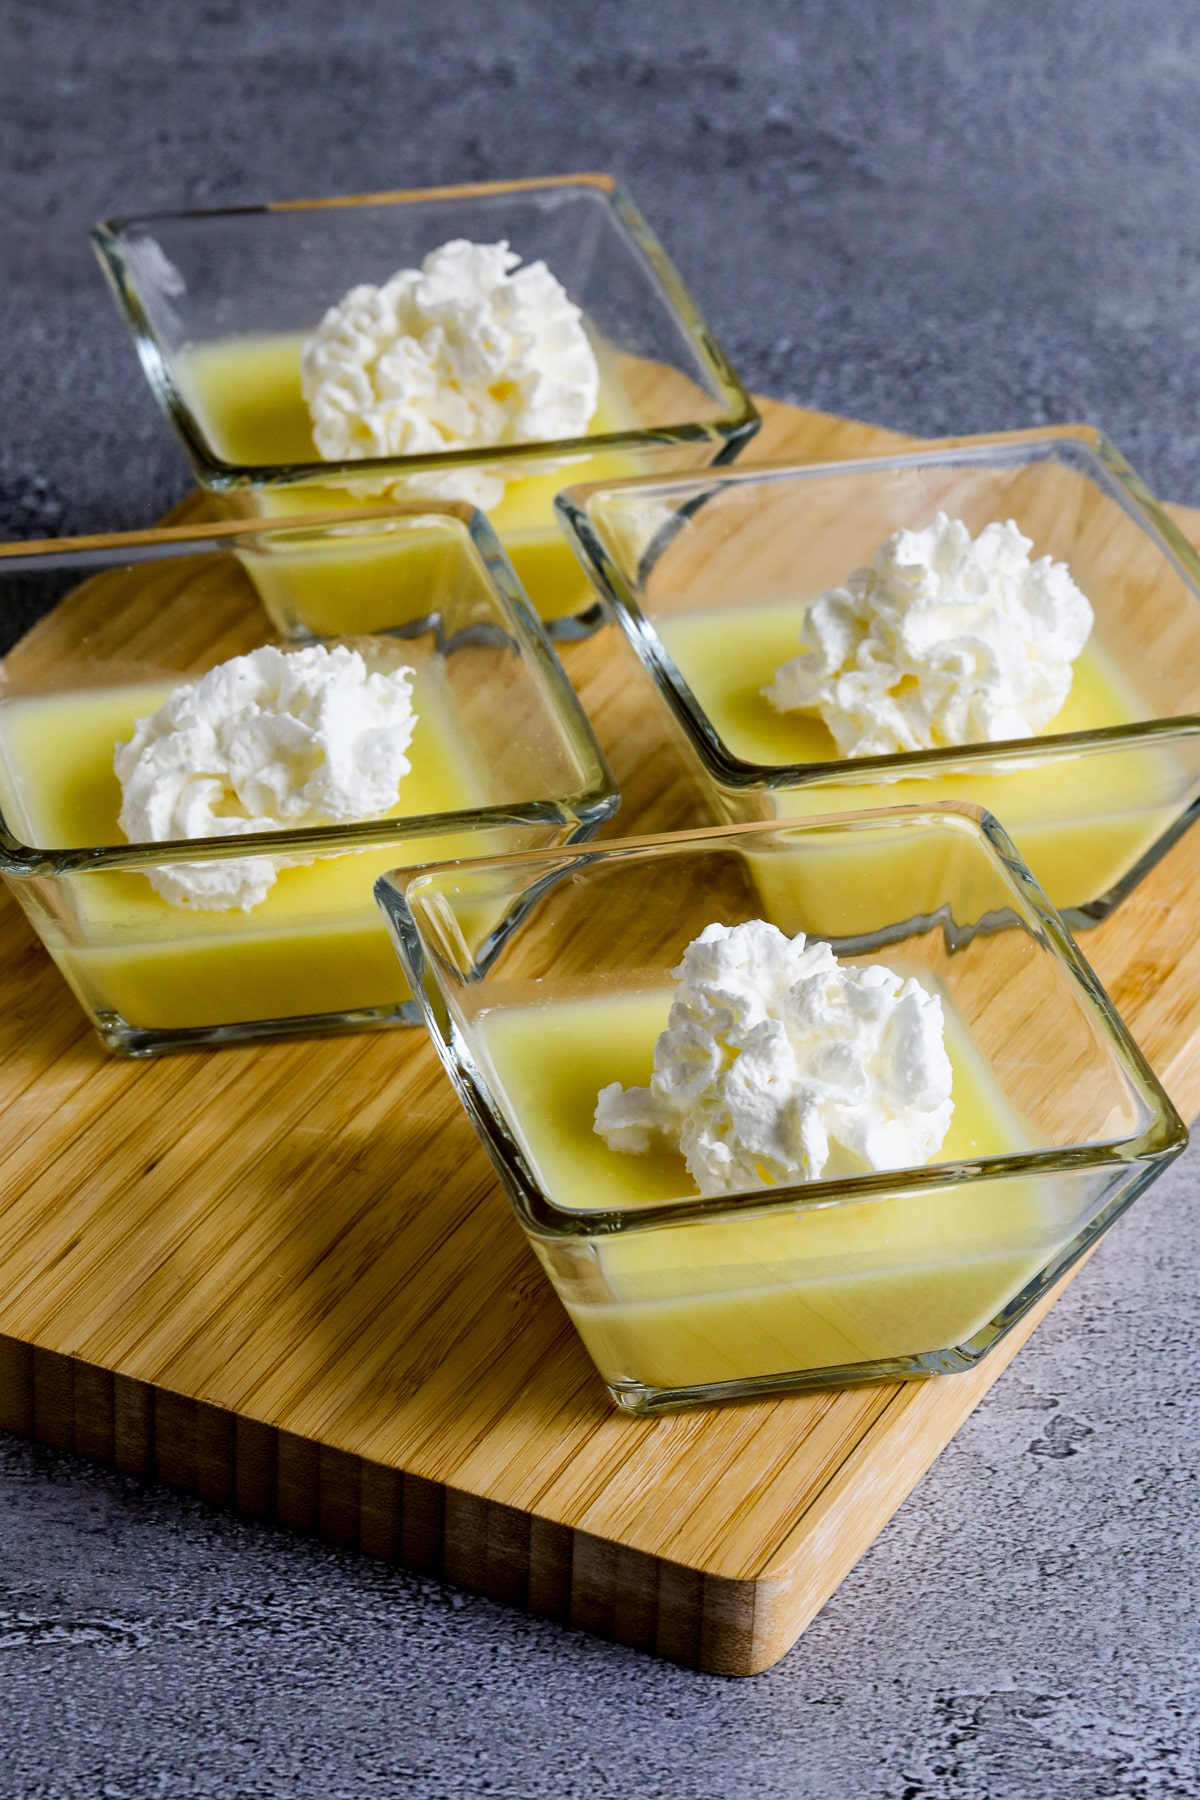 Sugar-Free Jelled Ricotta Pudding shown in four dishes.